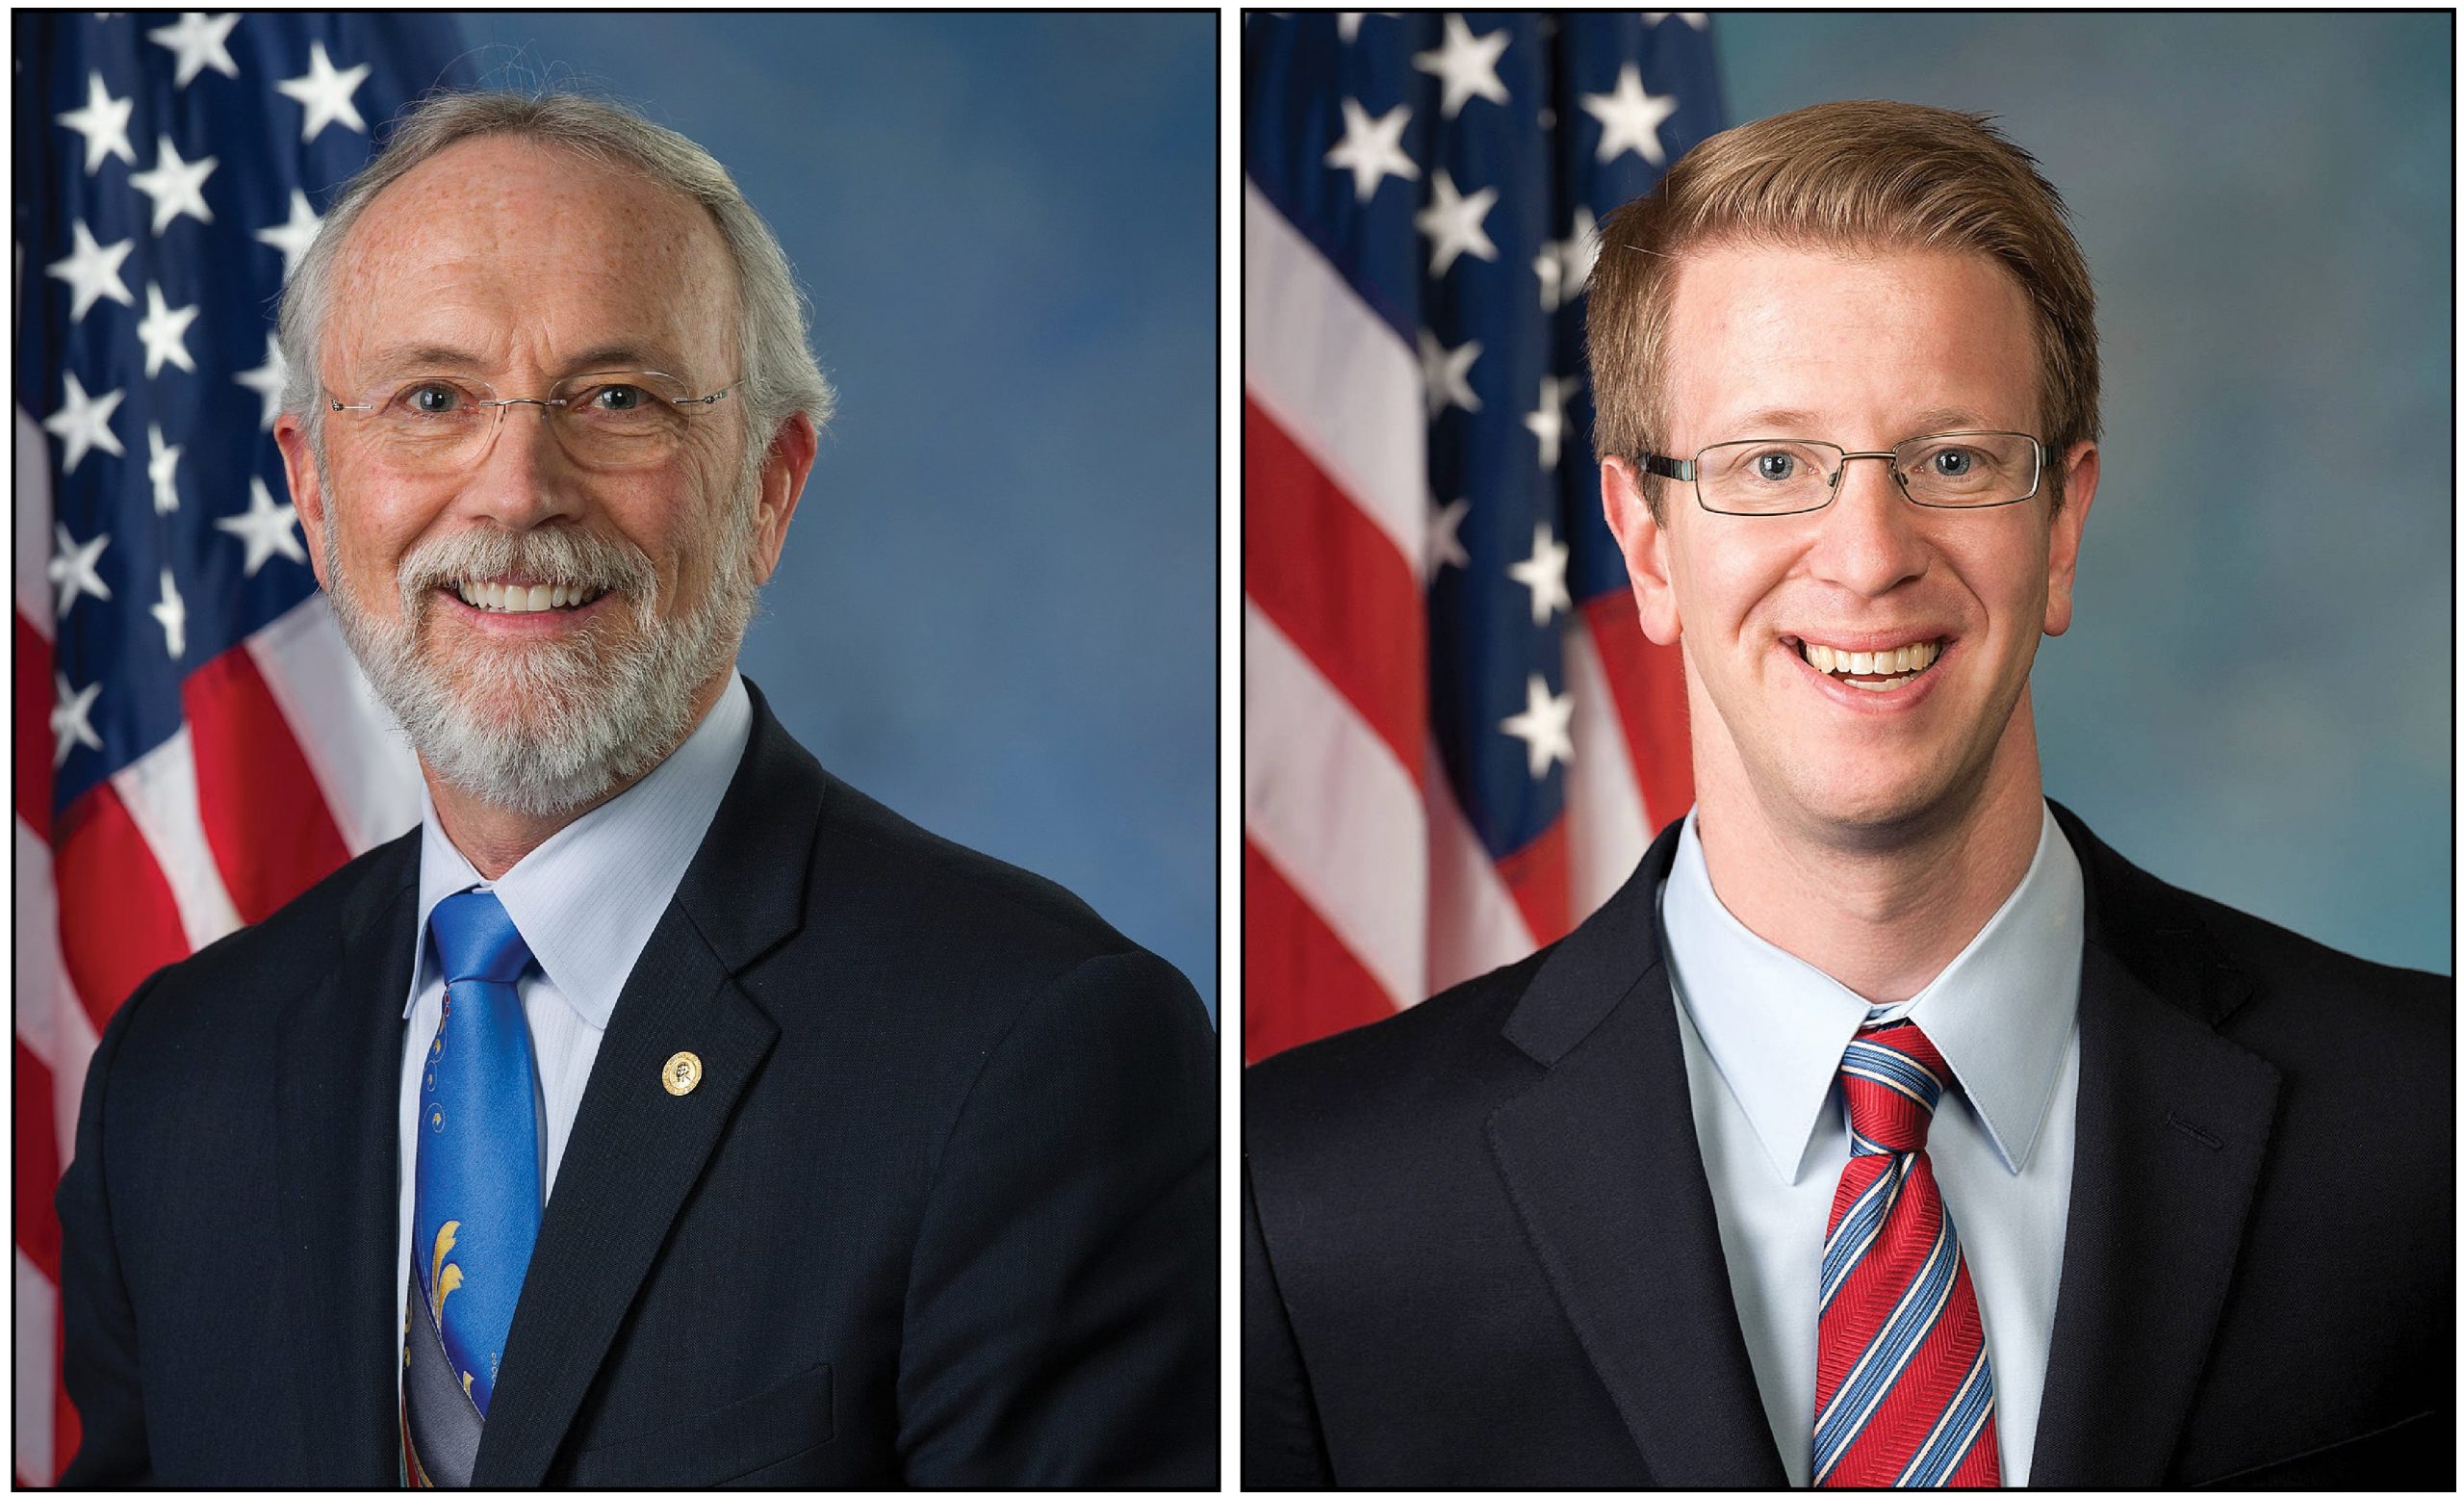 Newhouse & Kilmer Set Aside Partisanship to Serve Their Home State